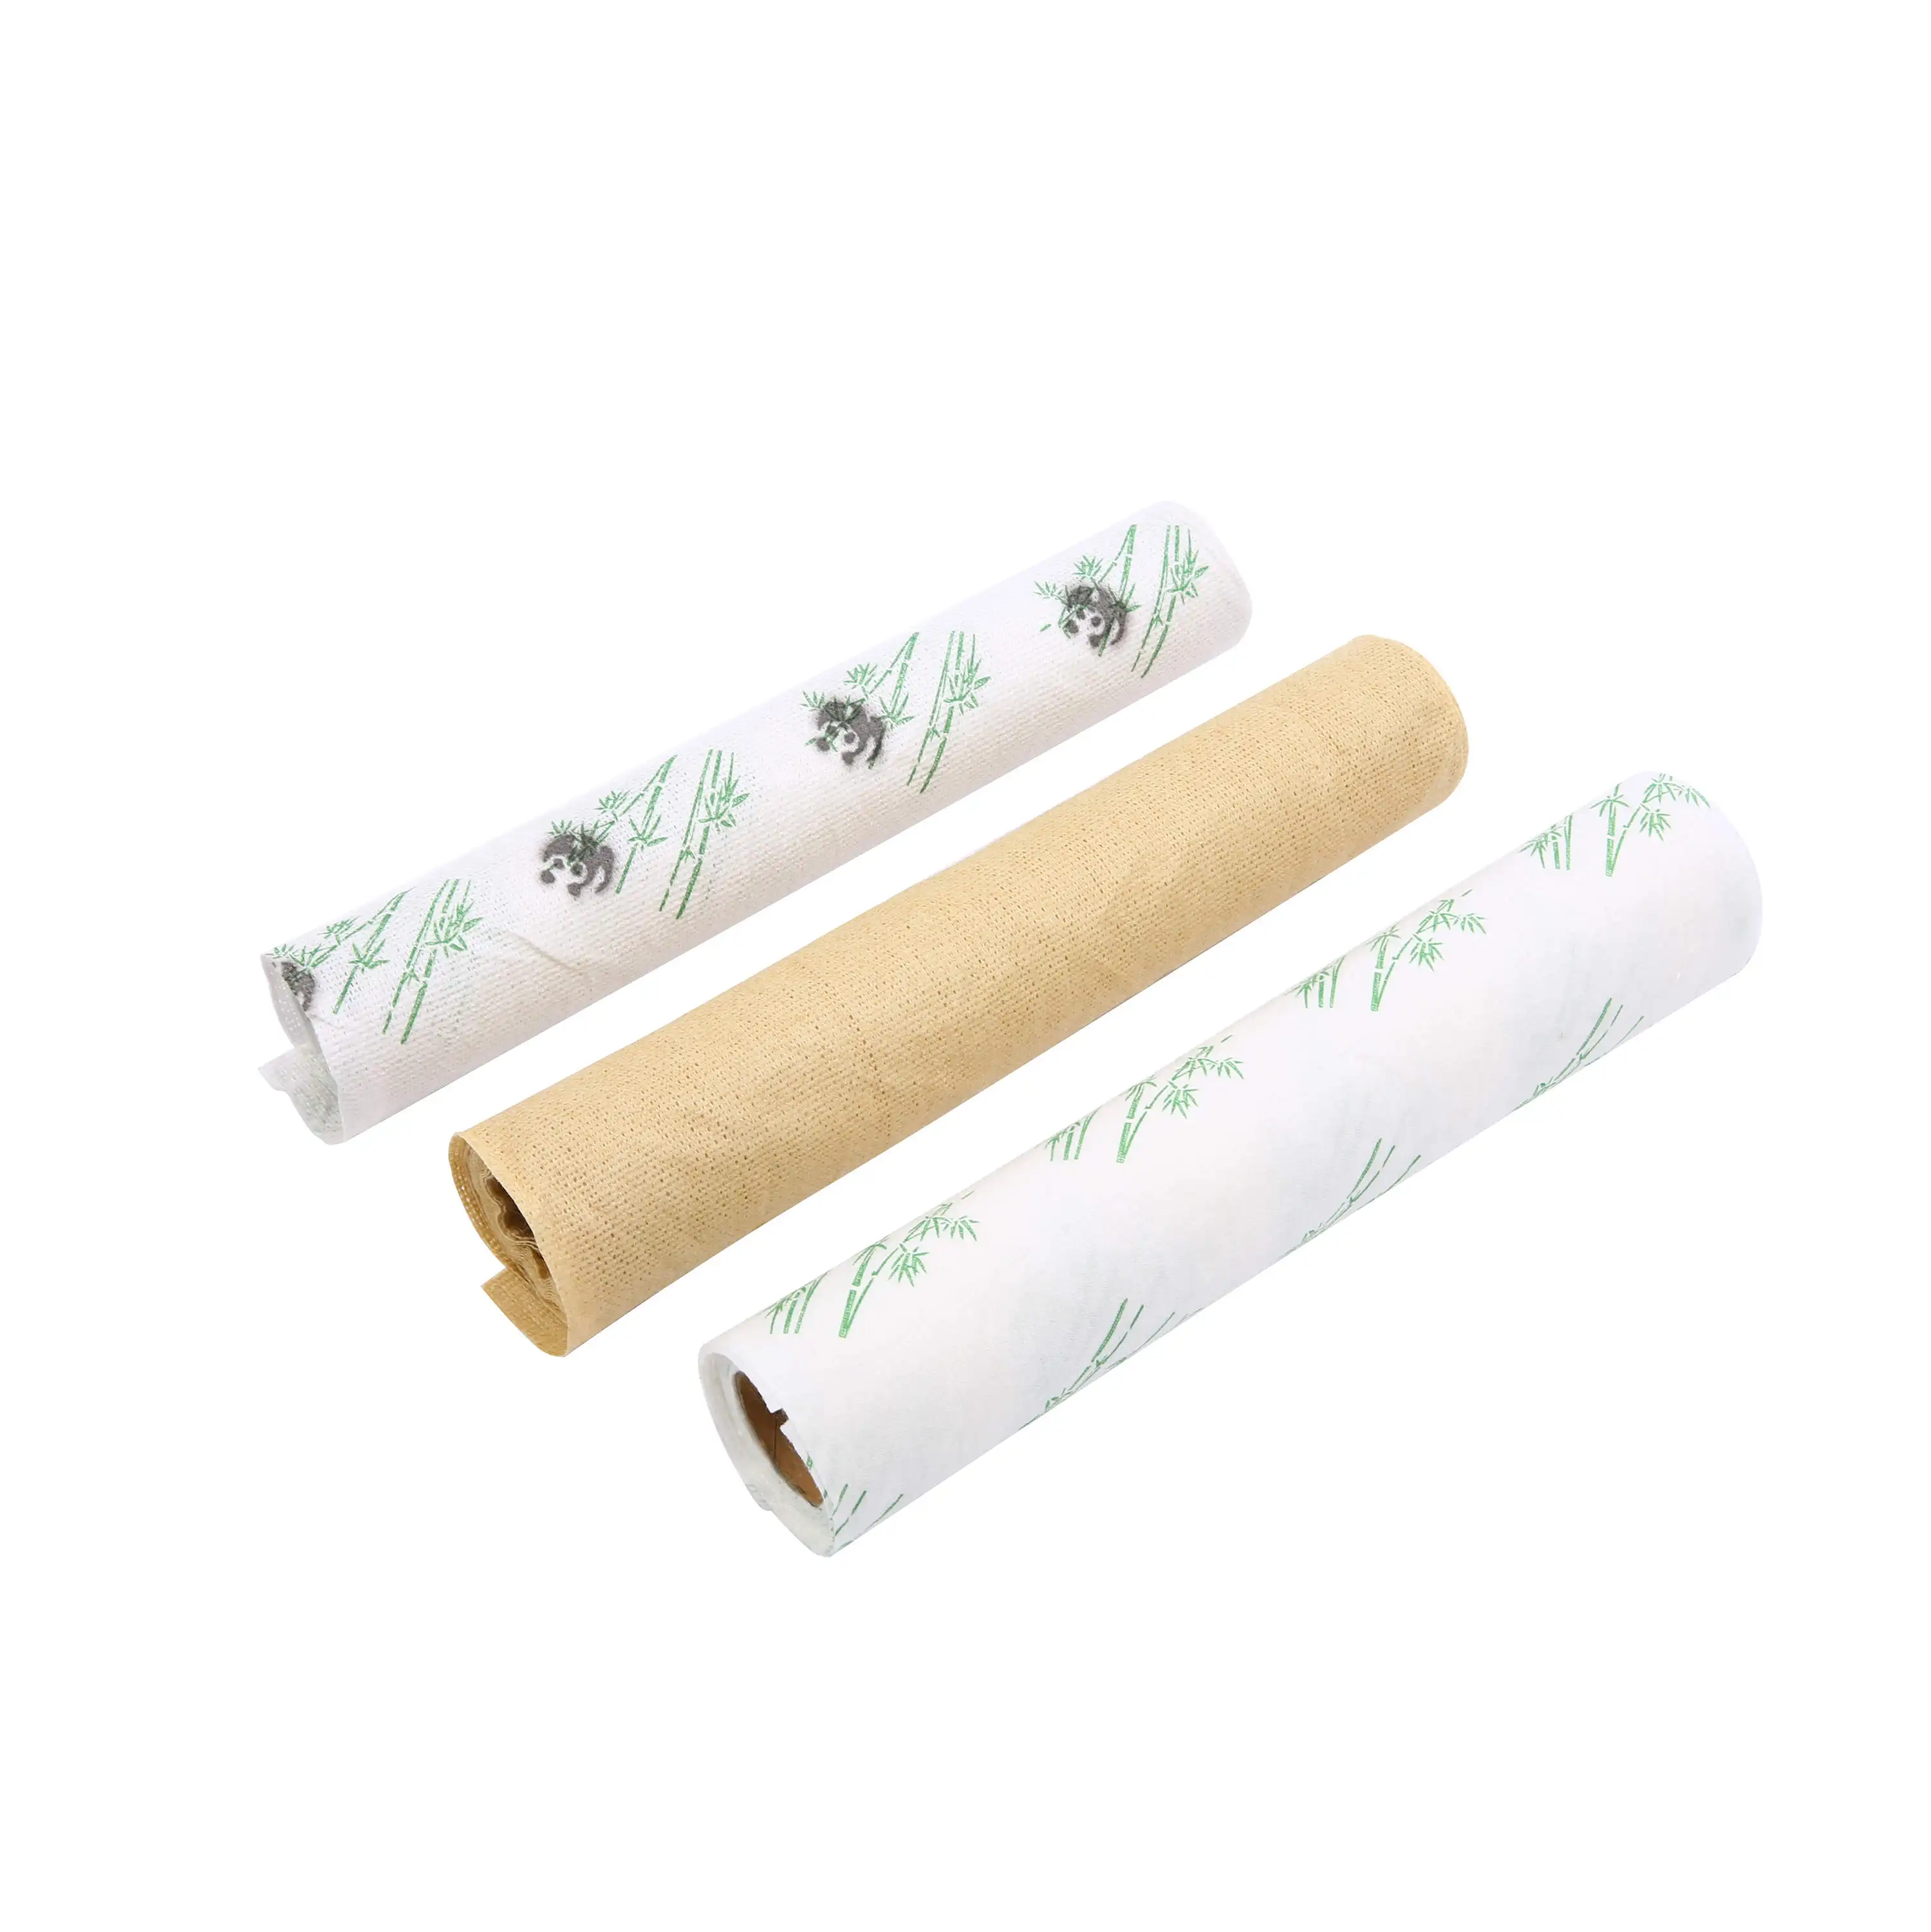 

Washable Reusable Biodegradable Wiping Cloth Natural Nonwoven Kitchen Cleaning Dishcloth Towel Roll Bamboo Fiber Paper Towels, White